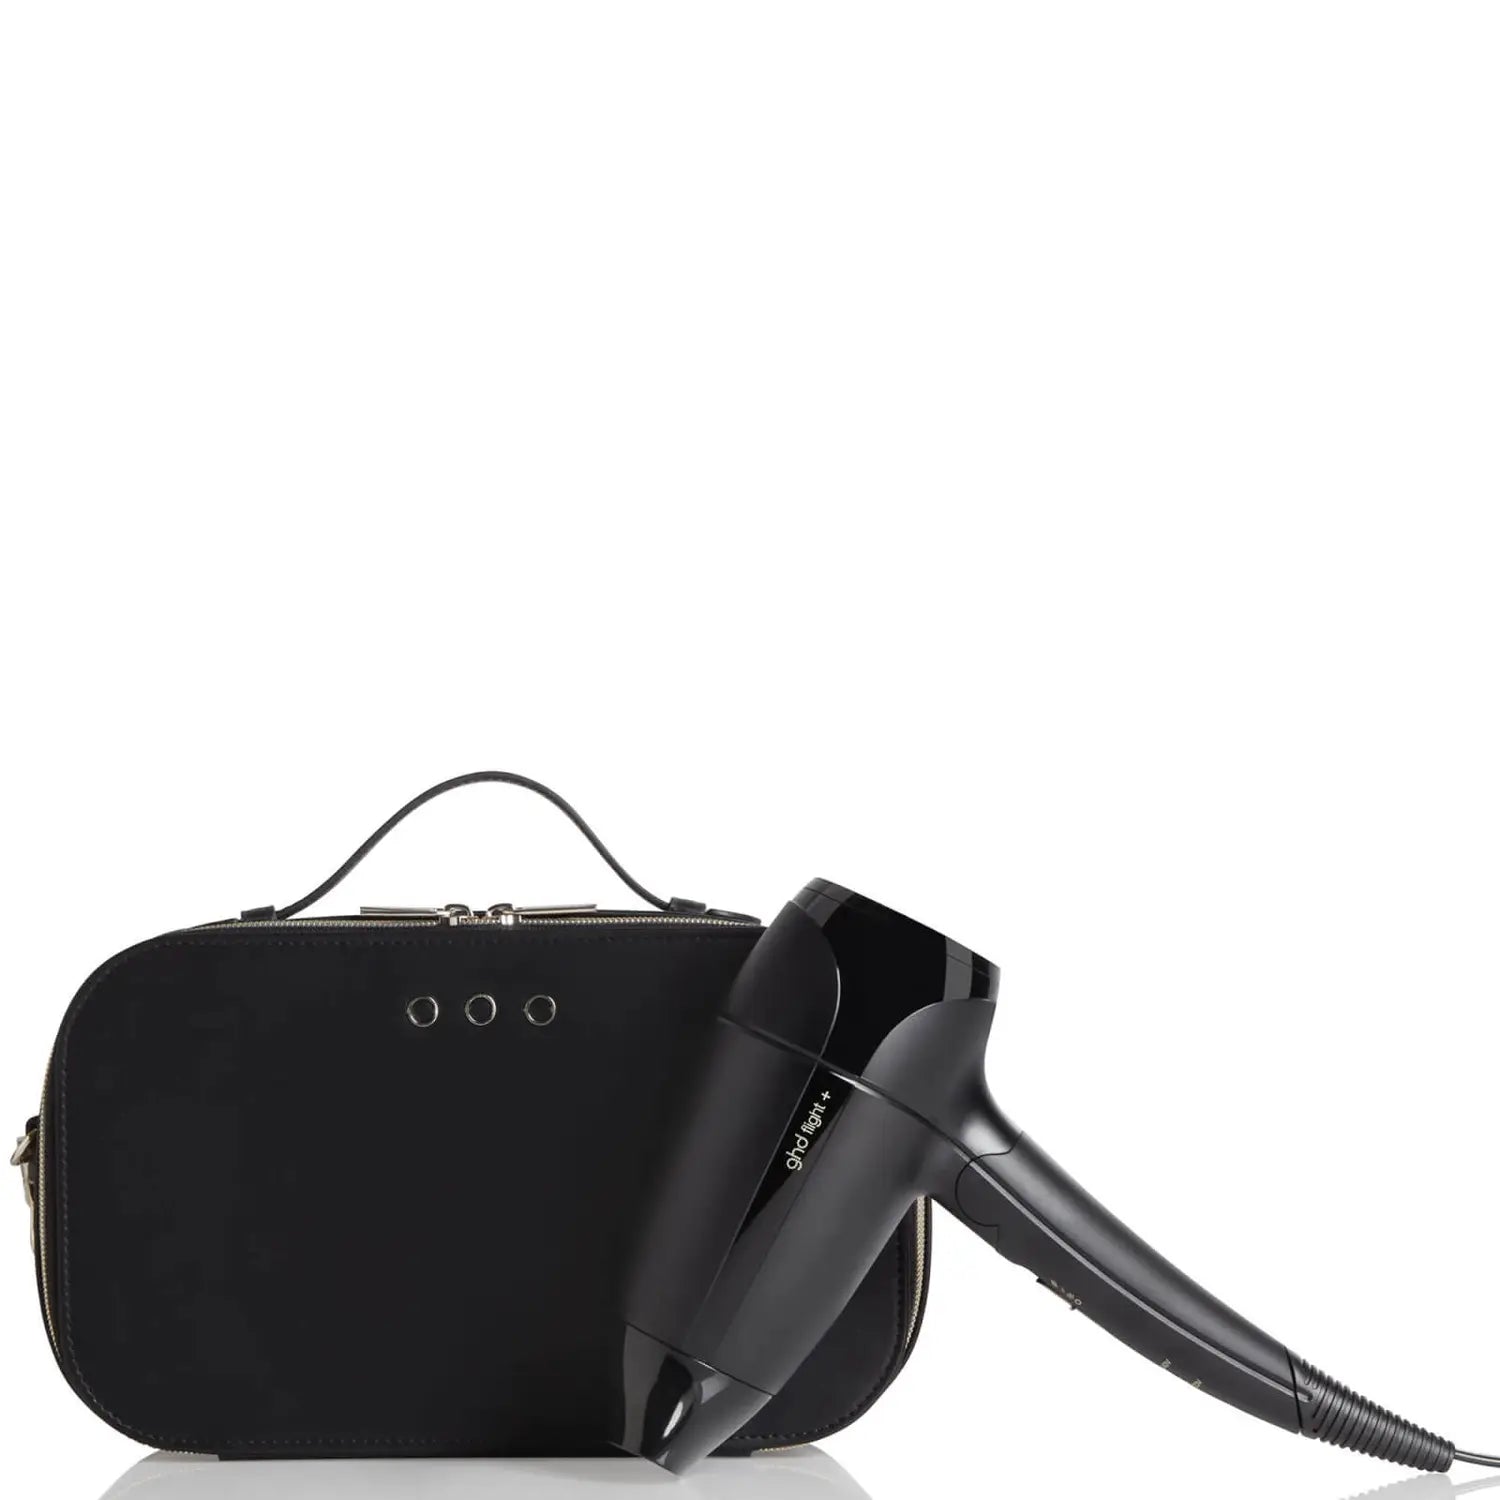 ghd Flight+ Travel Hair Dryer, with carry case